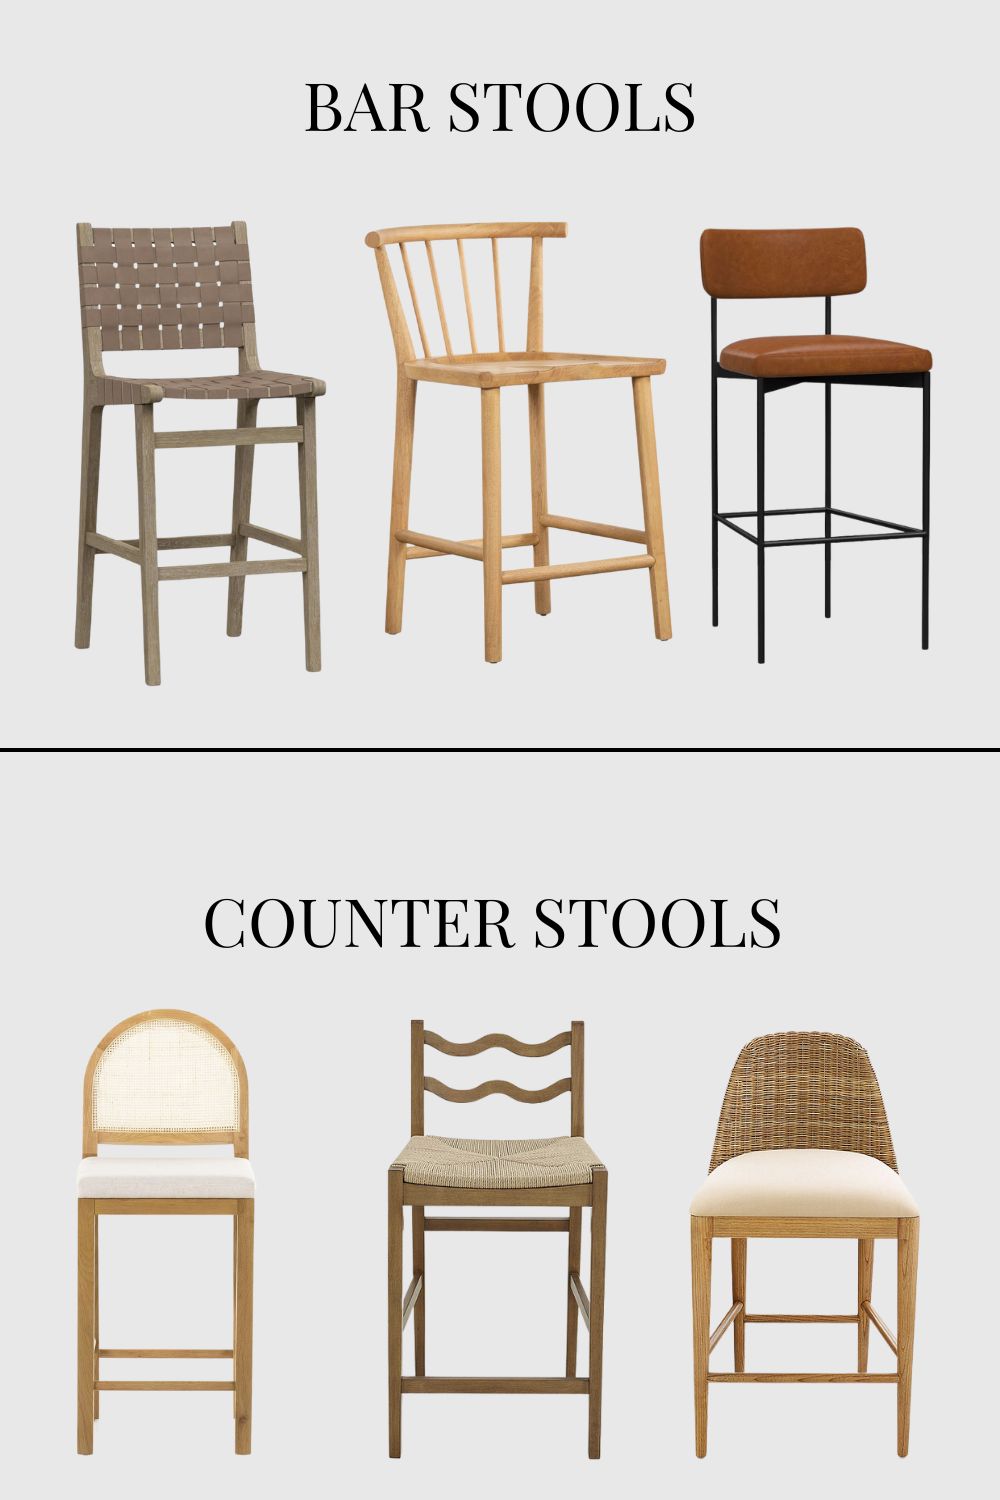 graphic with assortments of bar stools and counter stools